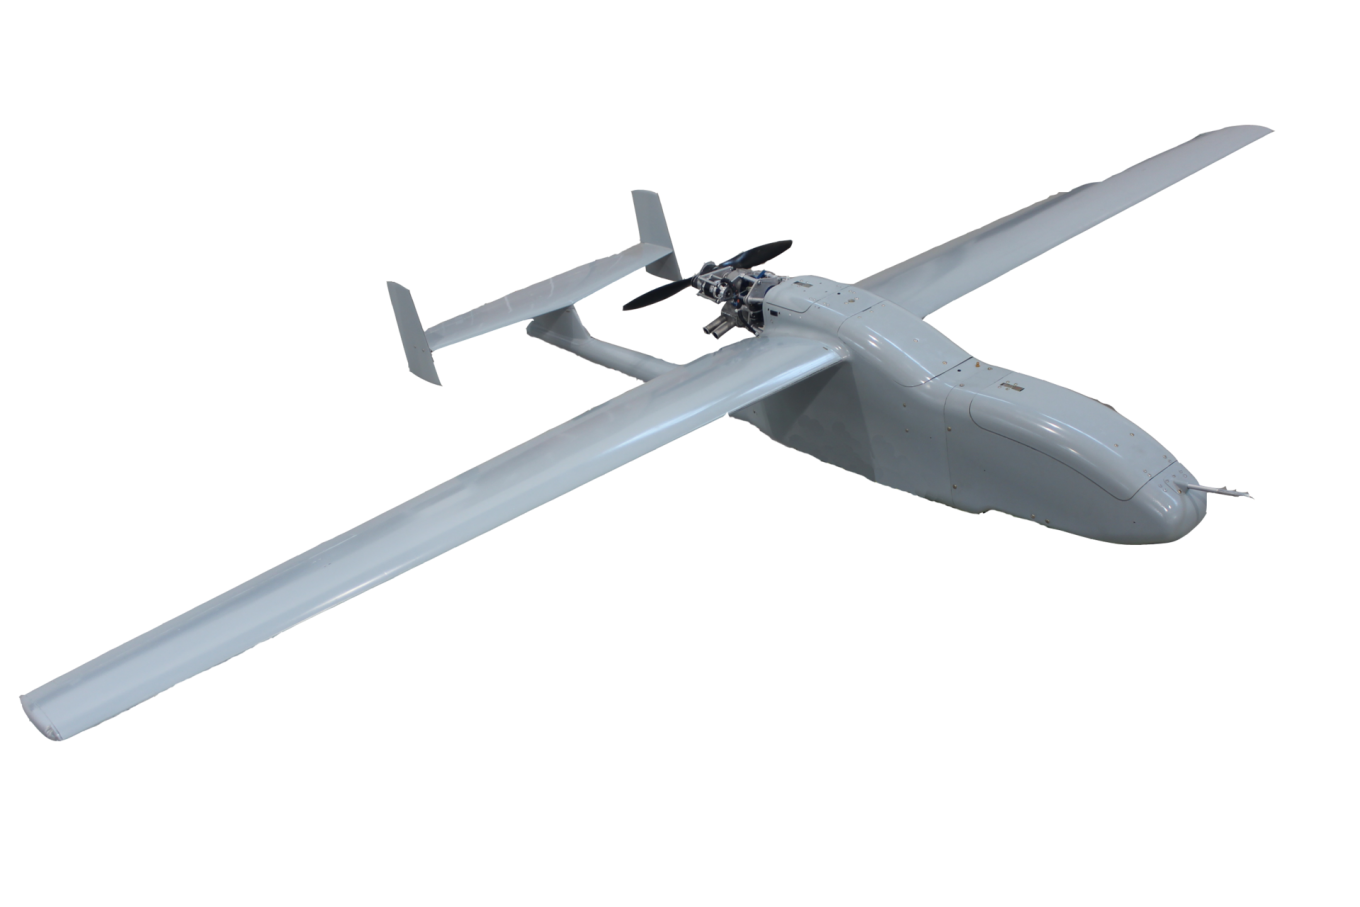 The Granat-4 system Defense Express Sanctions Hit russian Drones, Unmanned Systems Company Fails State Order for the Granat-4 Systems